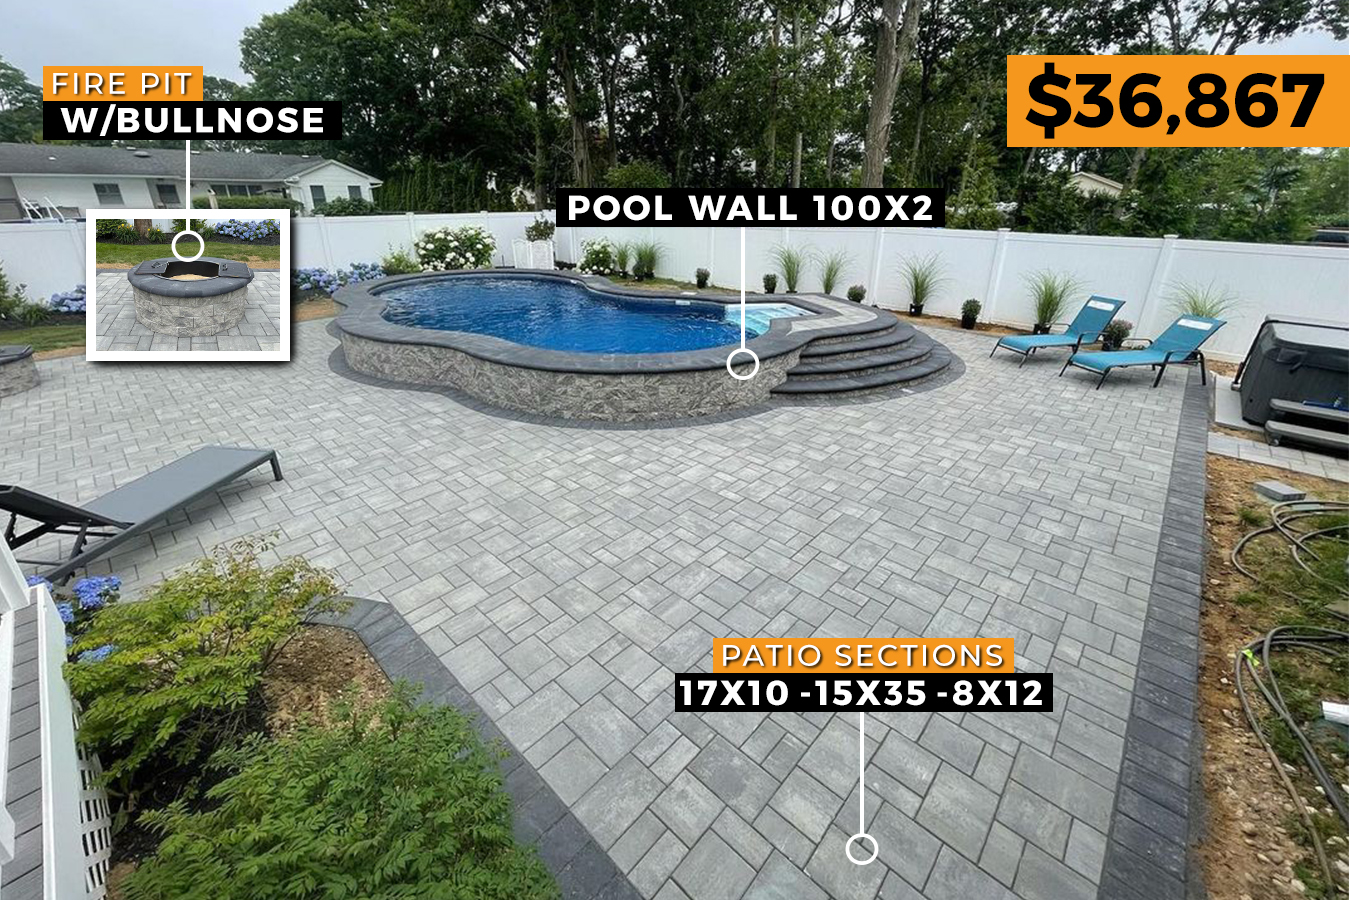 Pool patio installers near me, Pool patio installer, Stacked natural stone retaining walls create a terraced garden, showcasing a variety of plants and flowers. | Driveway installers near me